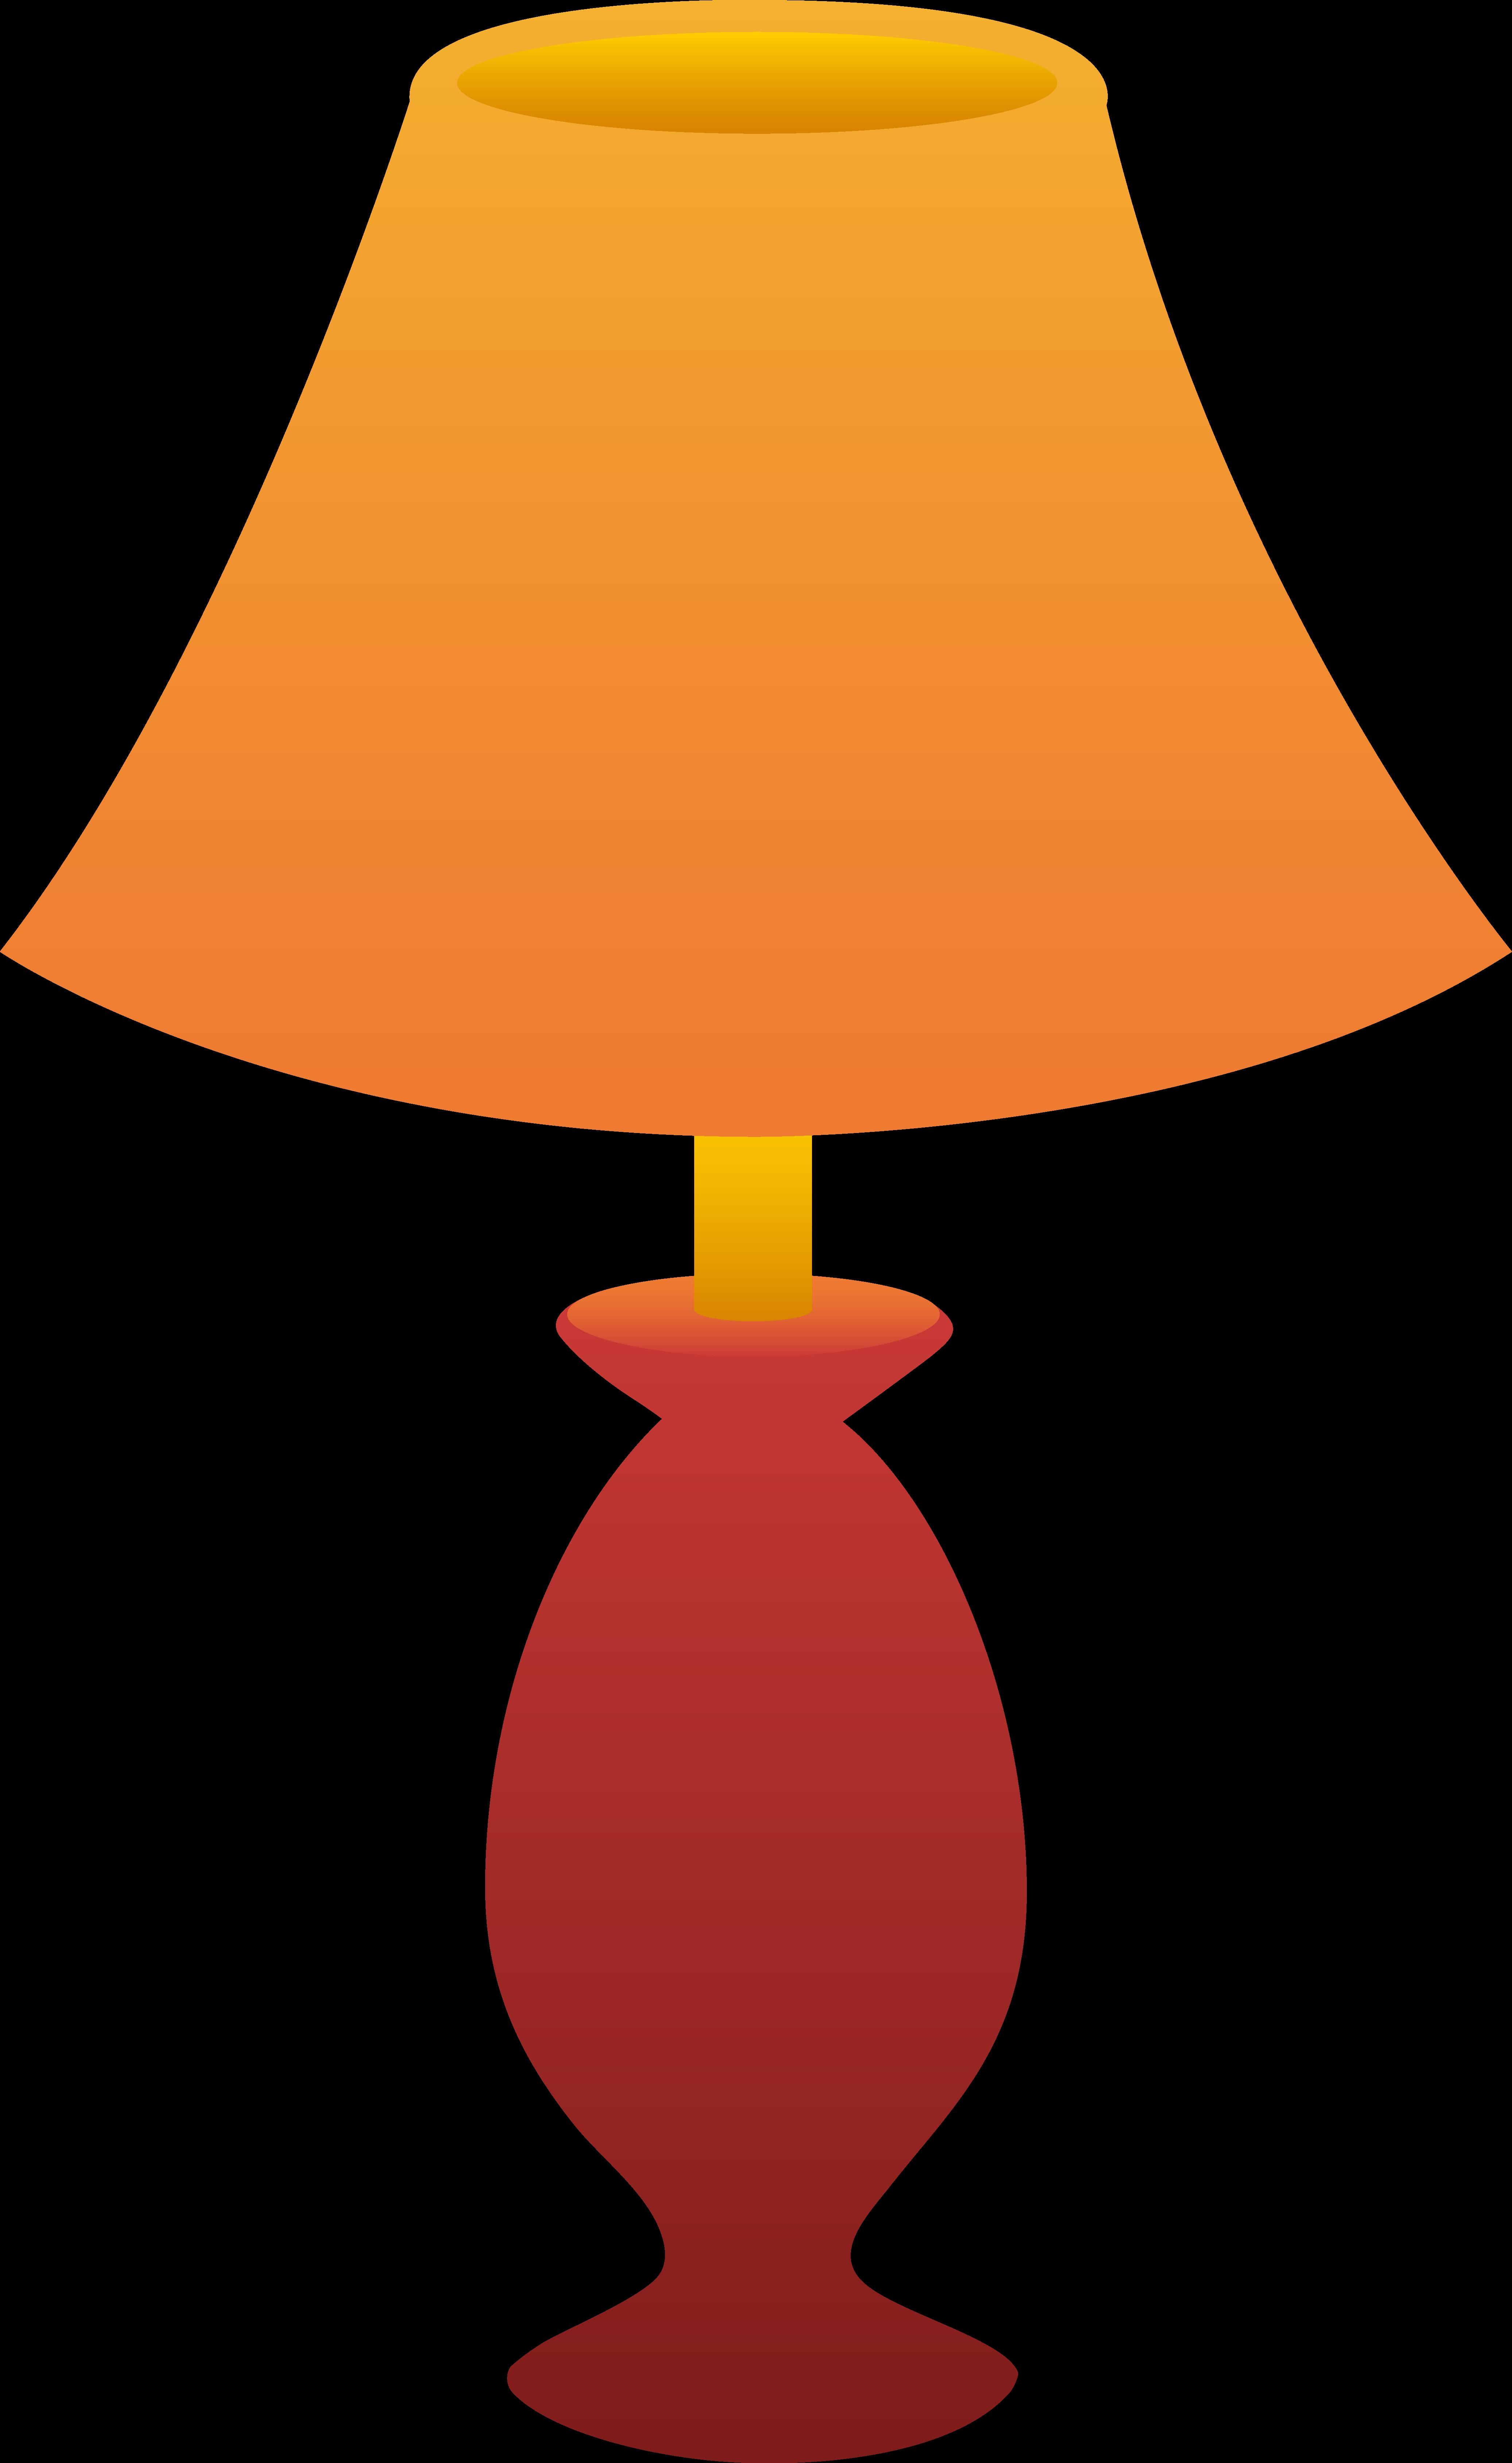 Lamp clipart red orange. Clip art library 